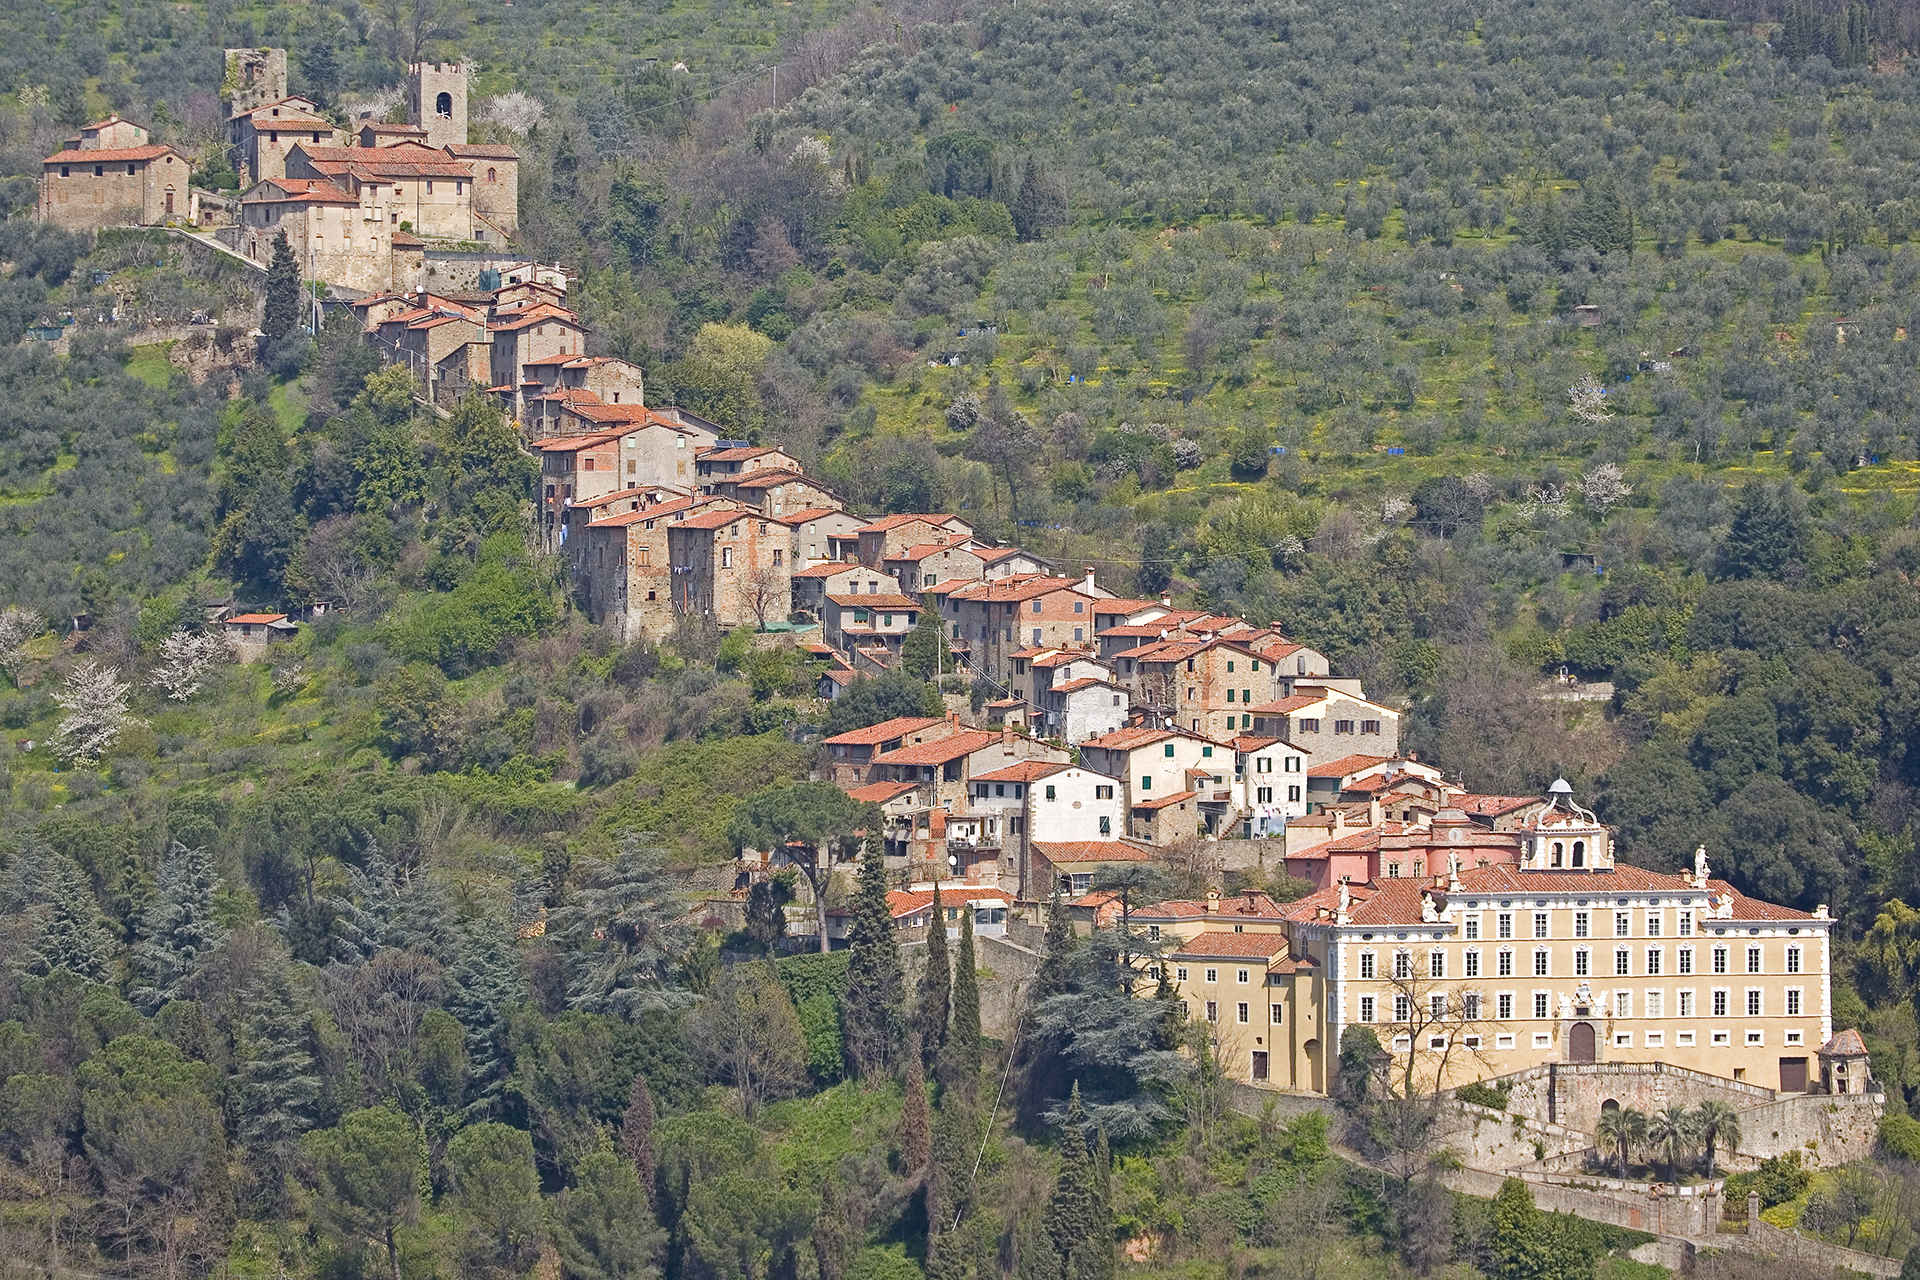 View of Collidi, Italy; Courtesy of Eder/Shutterstock.com